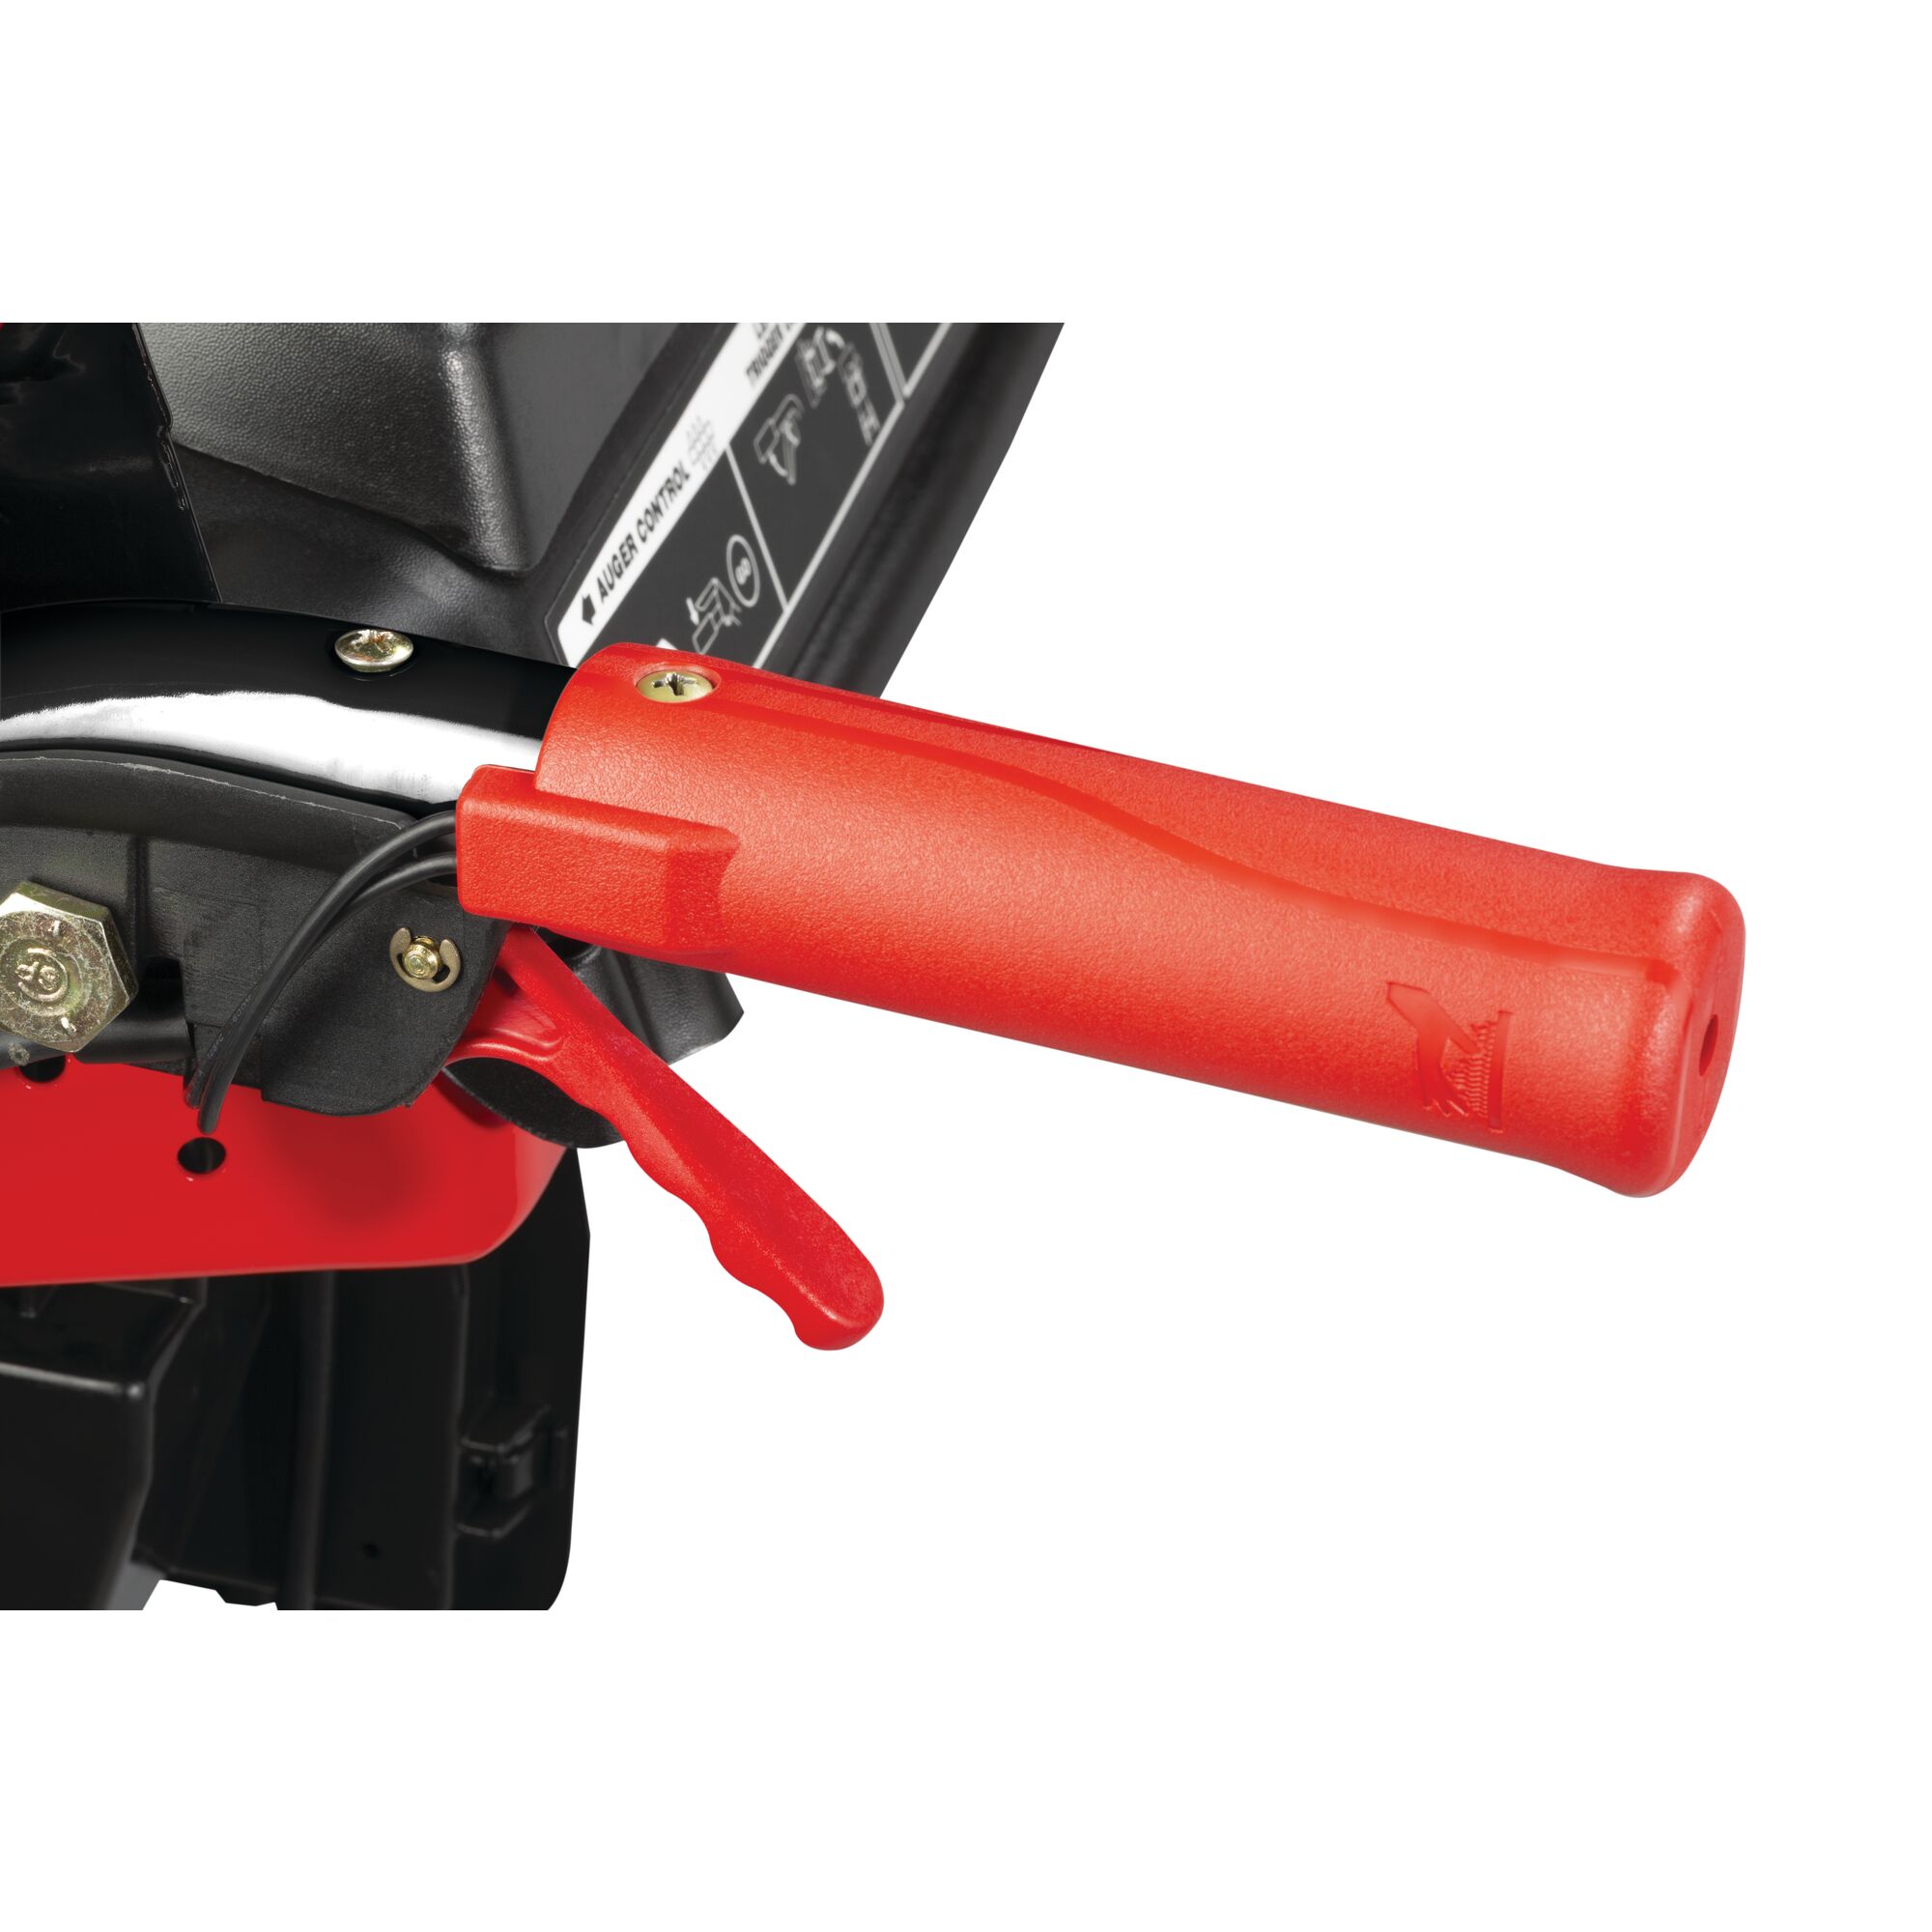 Heated hand grips feature in 30 inch 357 CC electric start two stage snow blower.